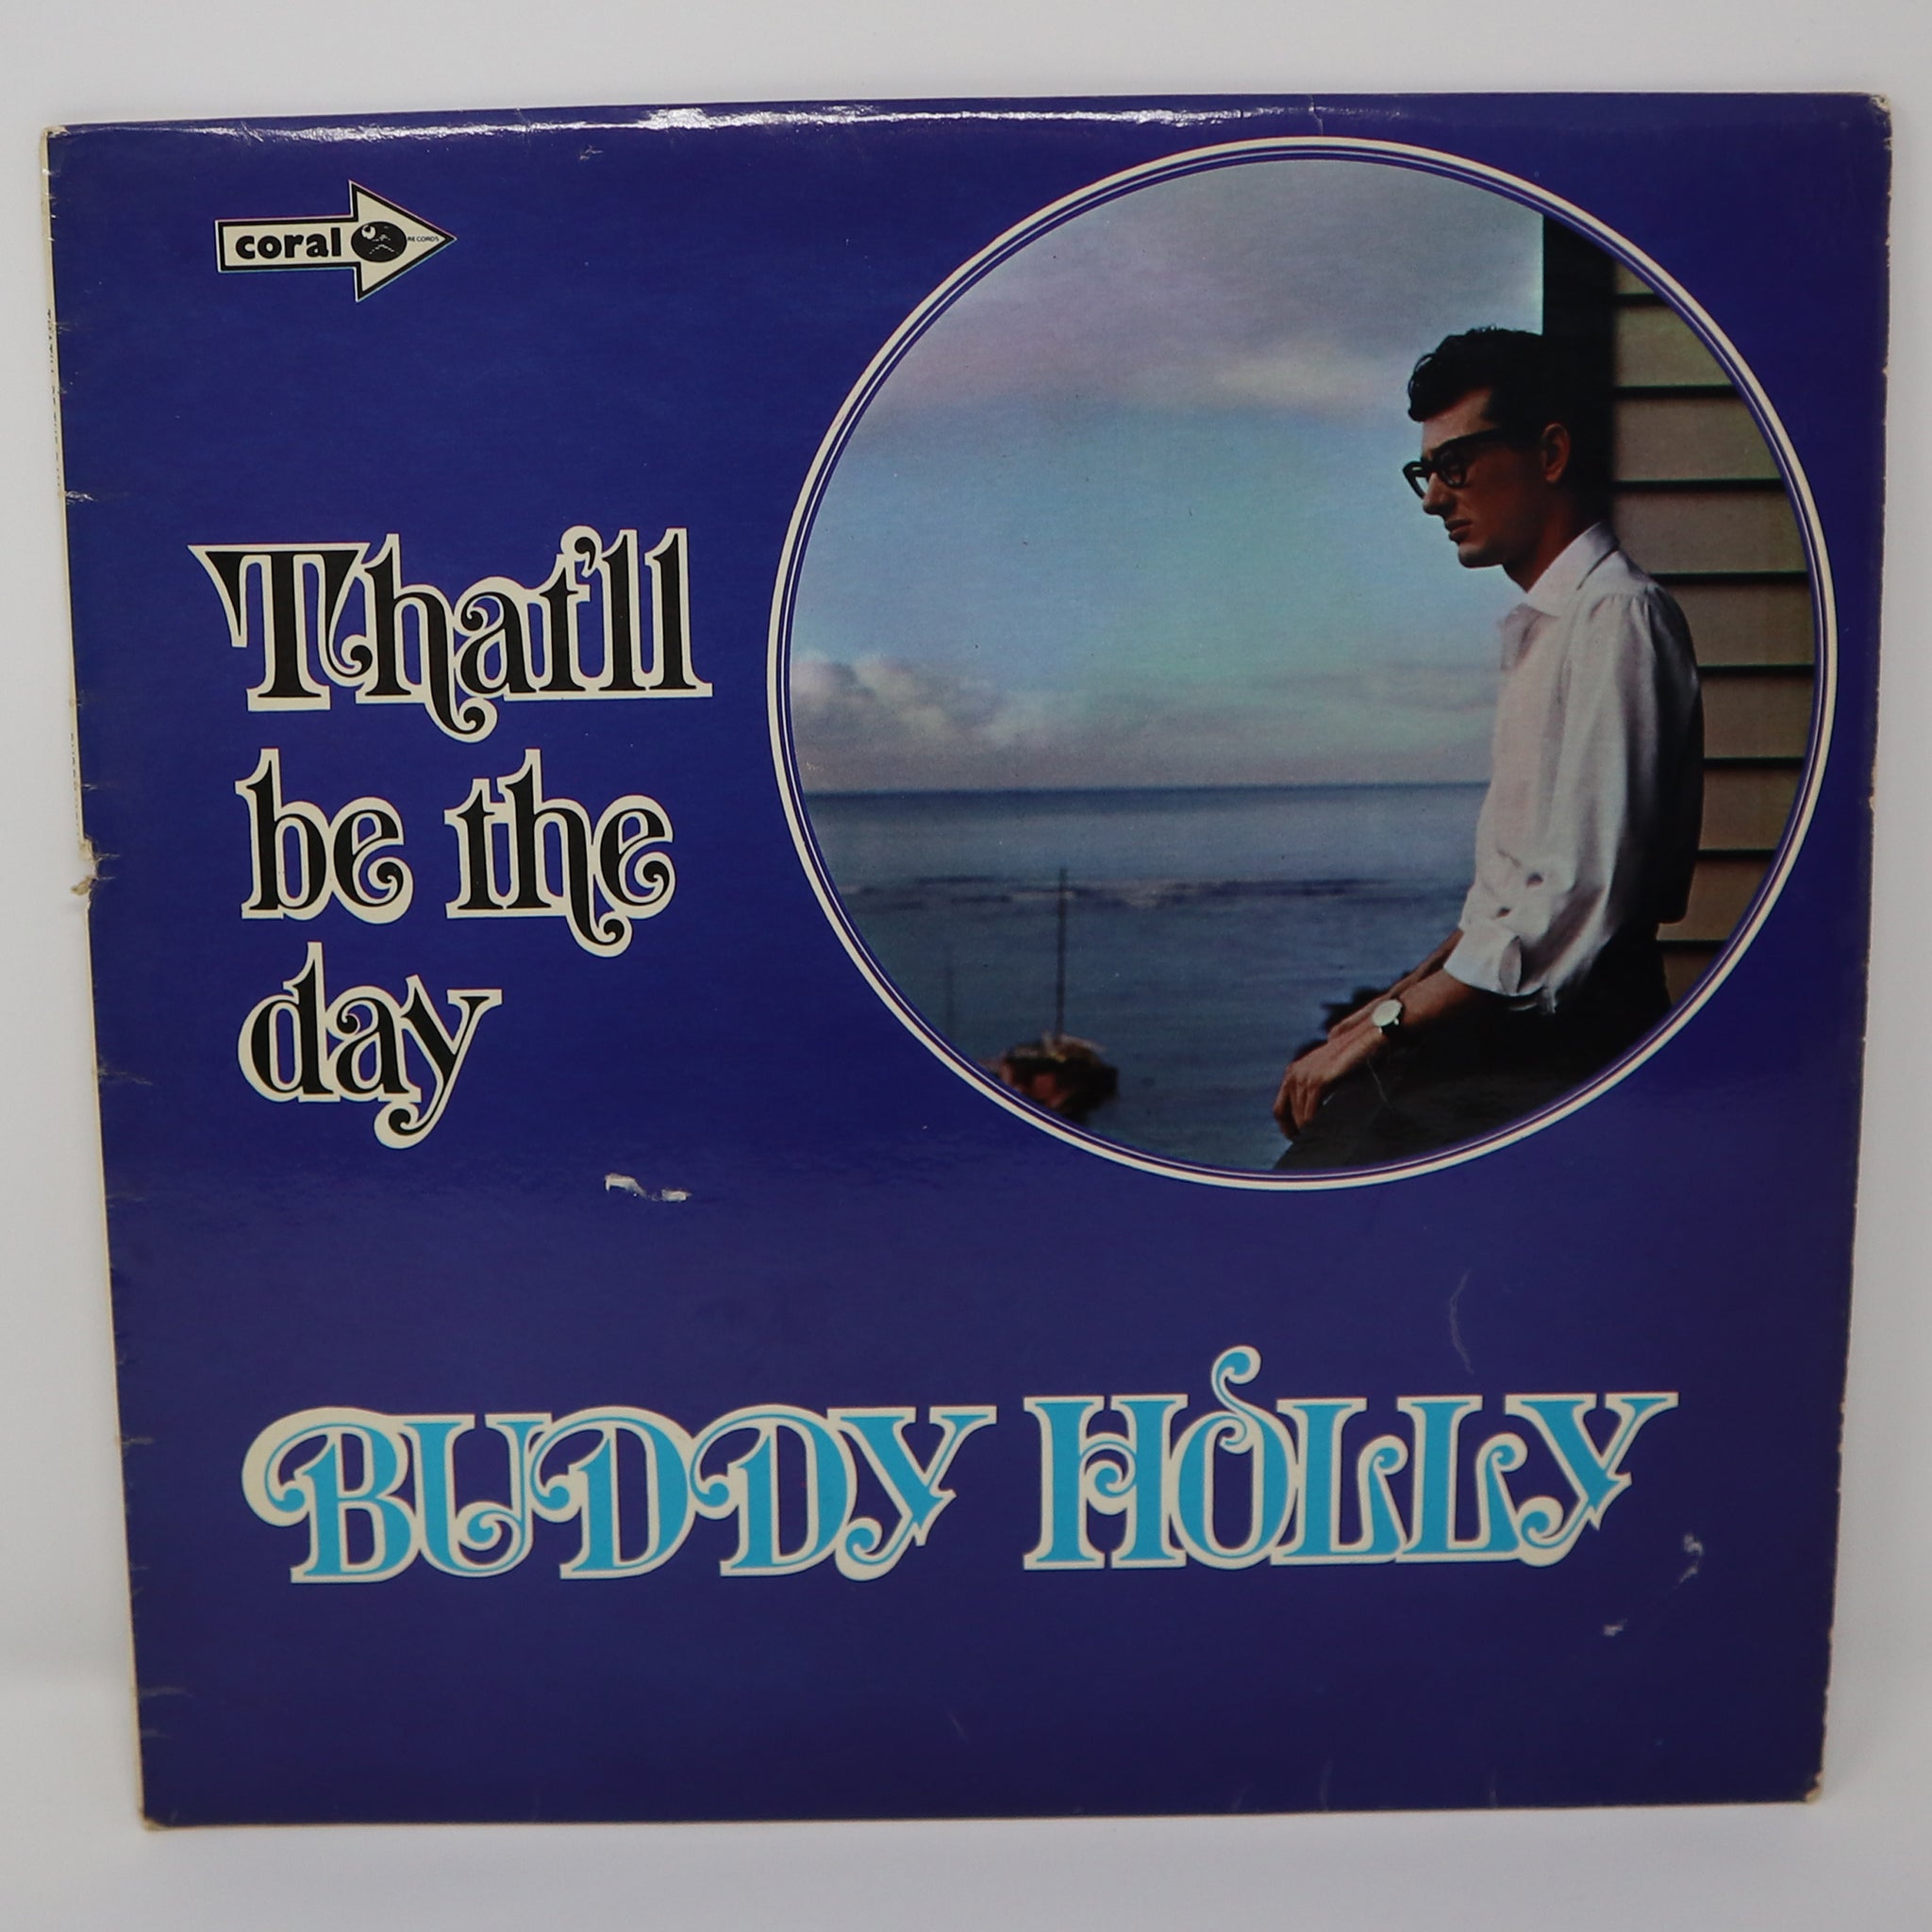 Vintage 1970 70s Coral Records Buddy Holly - That'll Be The Day 12" LP Album Vinyl Record Mono Reissue UK Version